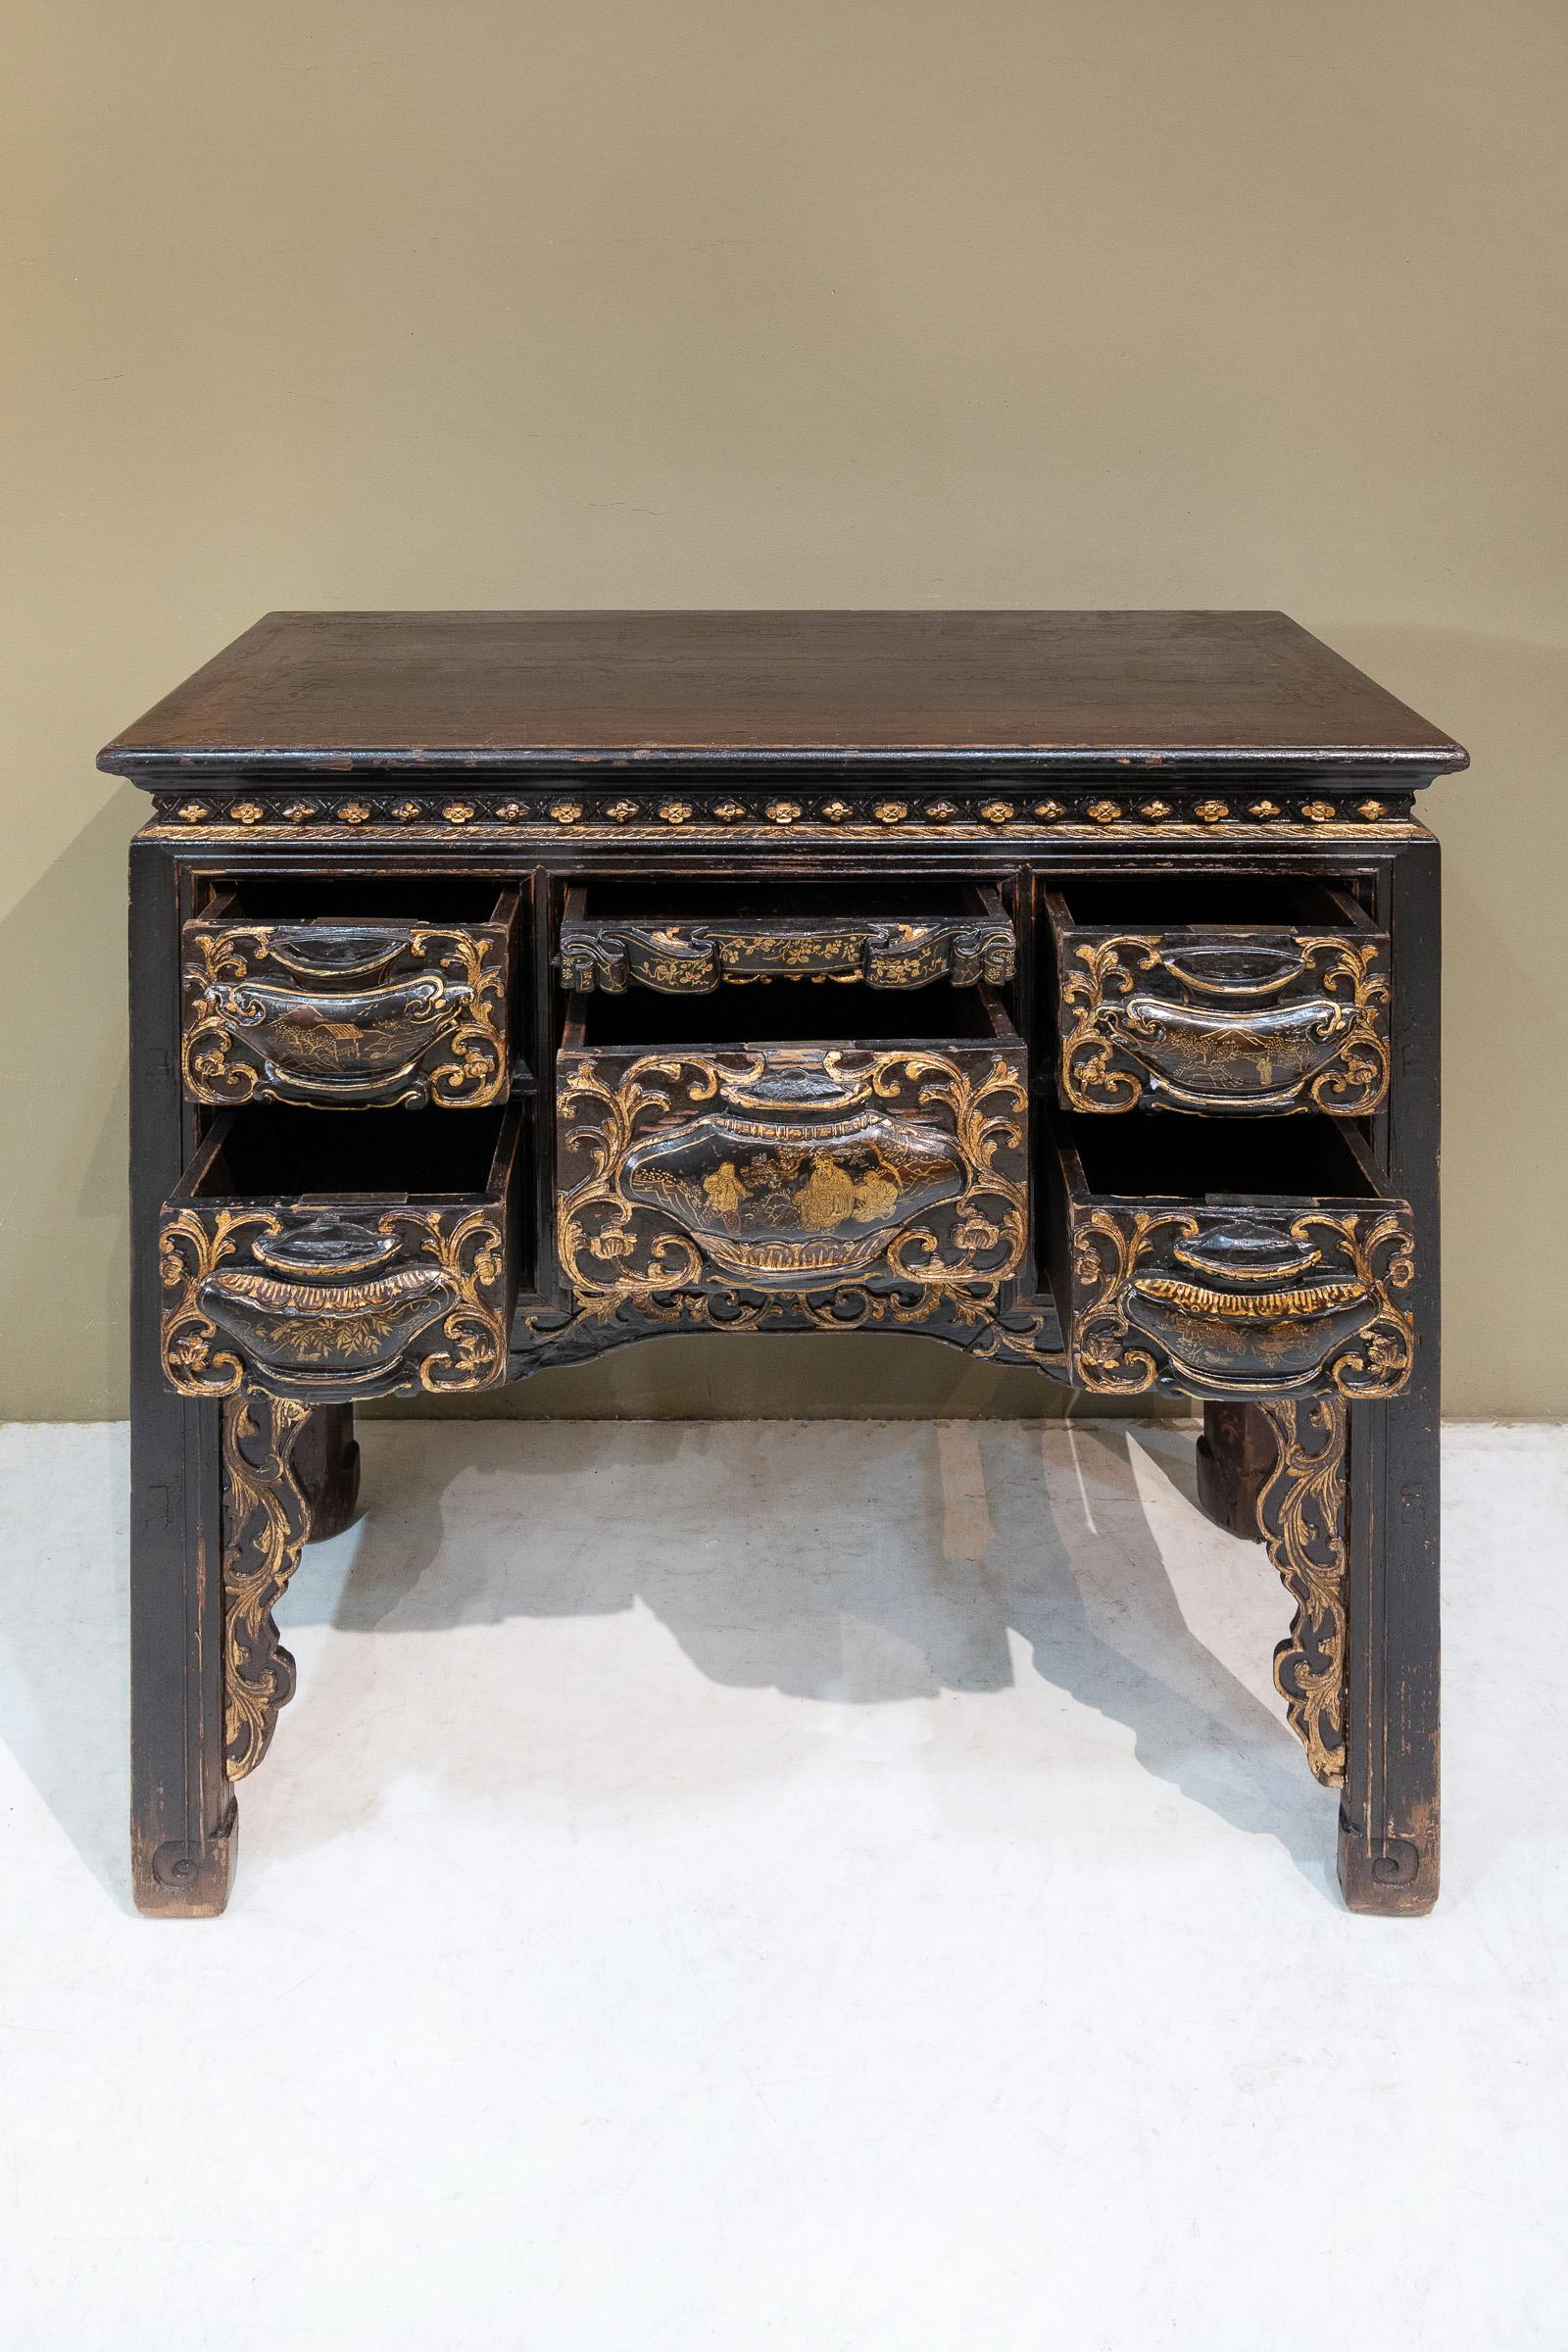 A beautiful black lacquered table with gold painting from Chaozhou province, China. The bulbous panels on the front of the drawers and the black & gold colour combination are very typical designs of the Chaozhou region.
 
The designs on the